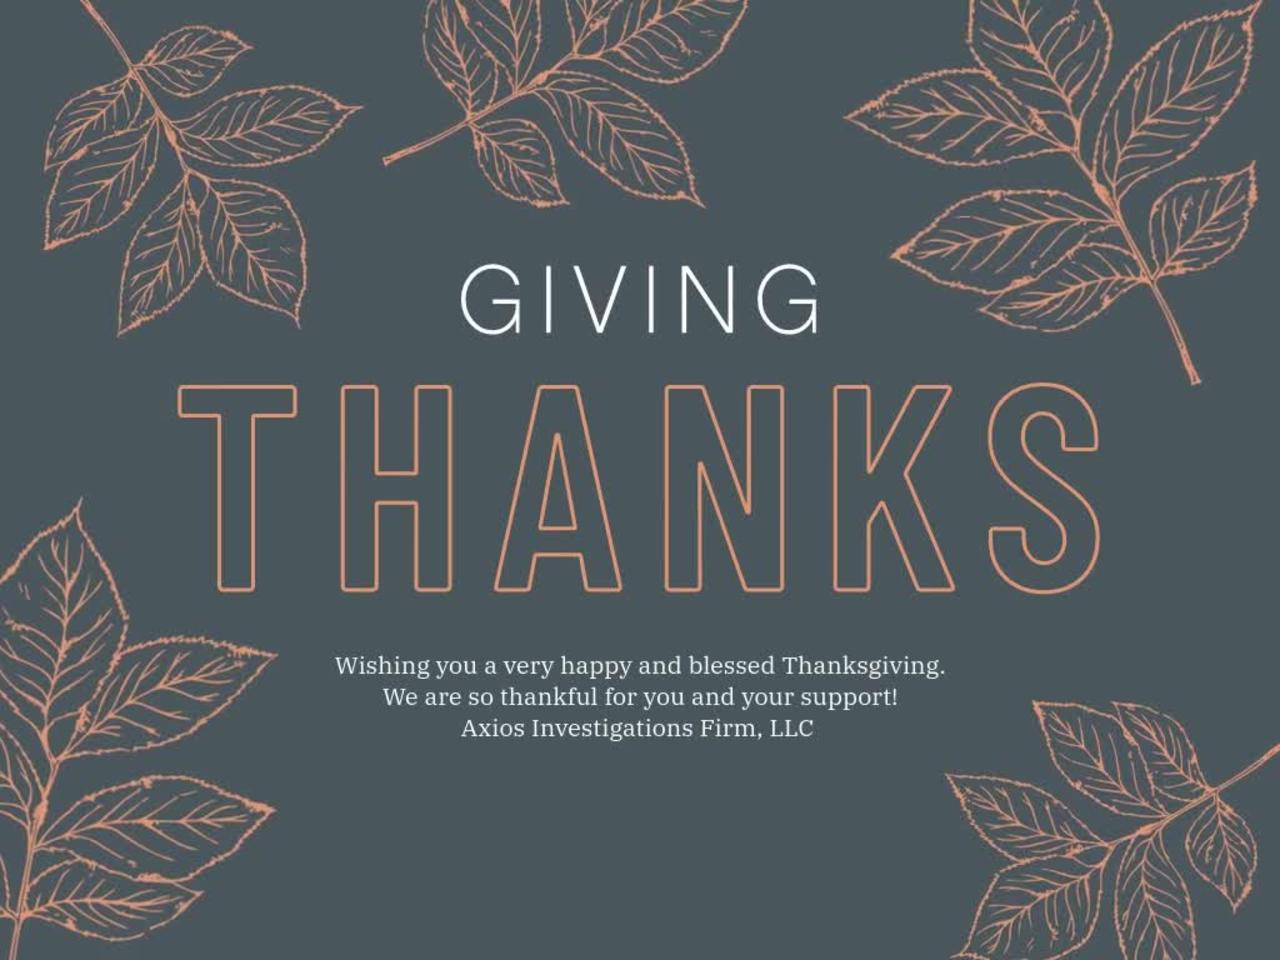 Happy Thanksgiving From Axios Investigations Firm!